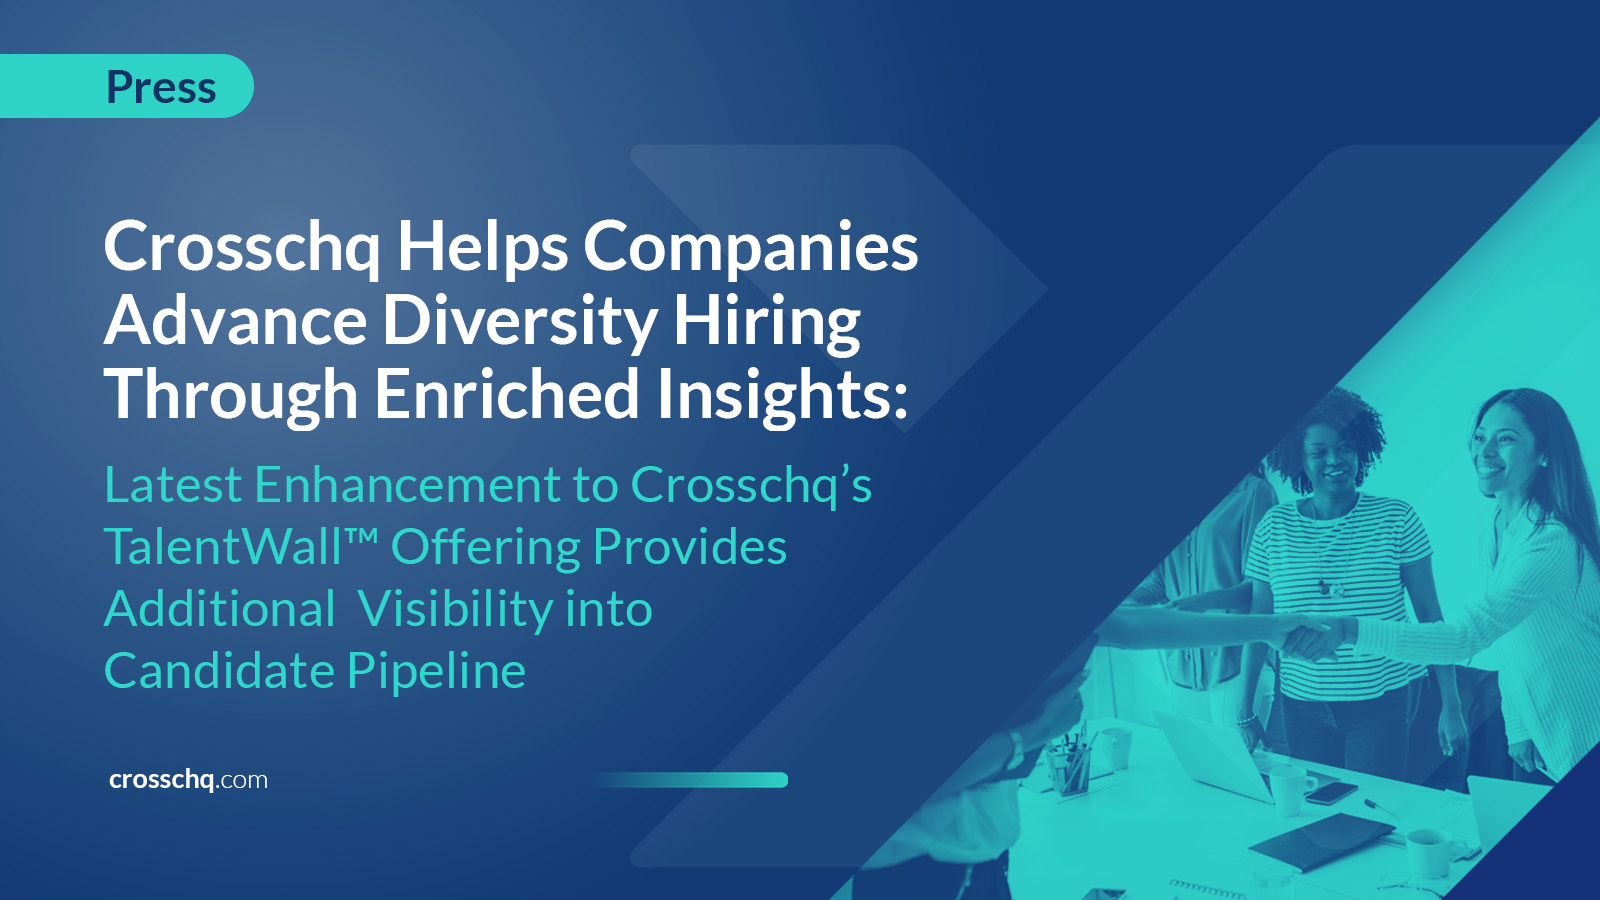 Crosschq Helps Companies Advance Diversity Hiring Through Enriched Insights